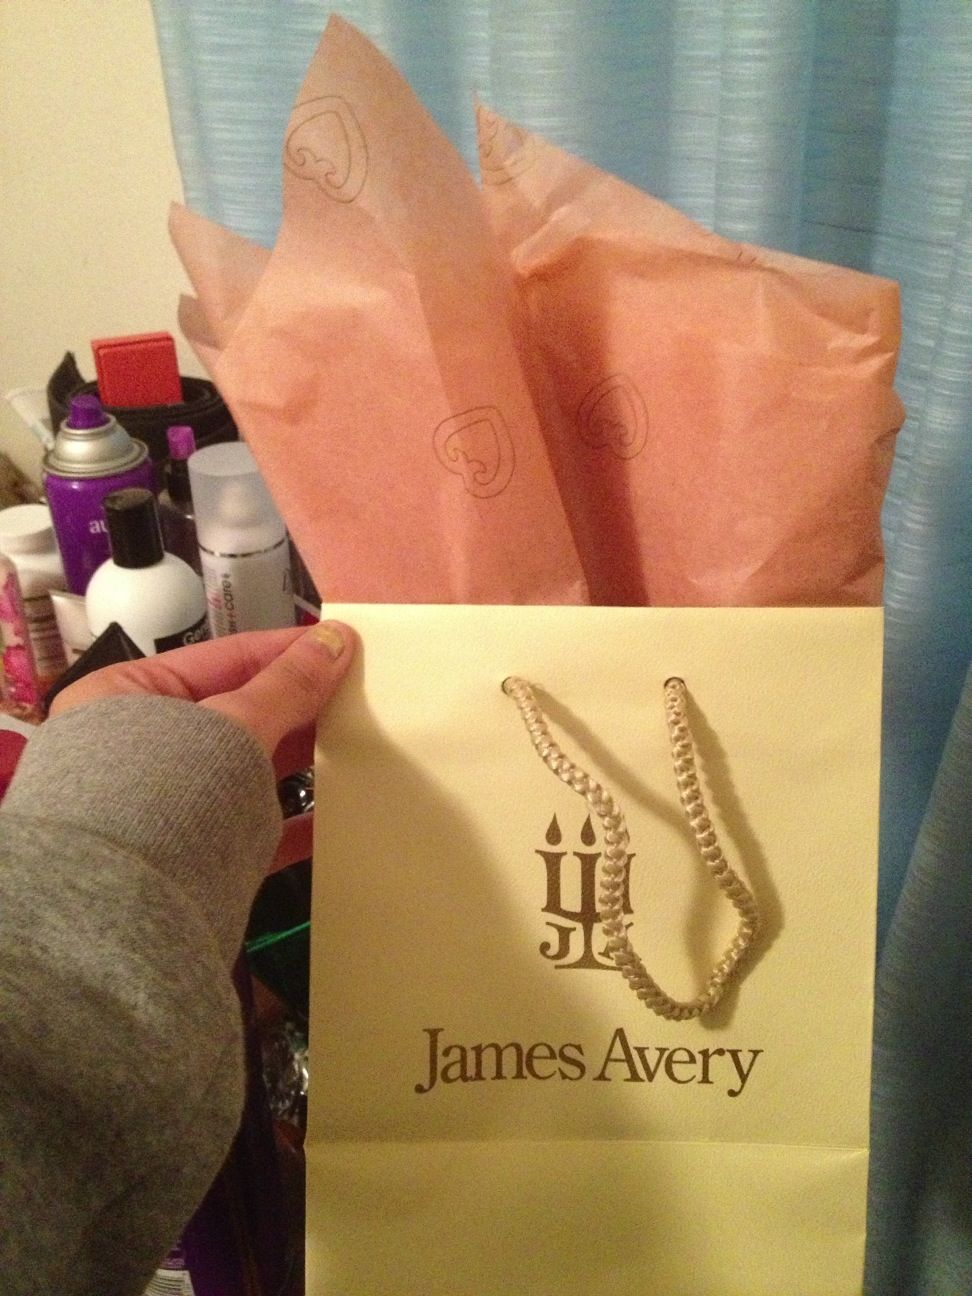 James avery for my bby ❤